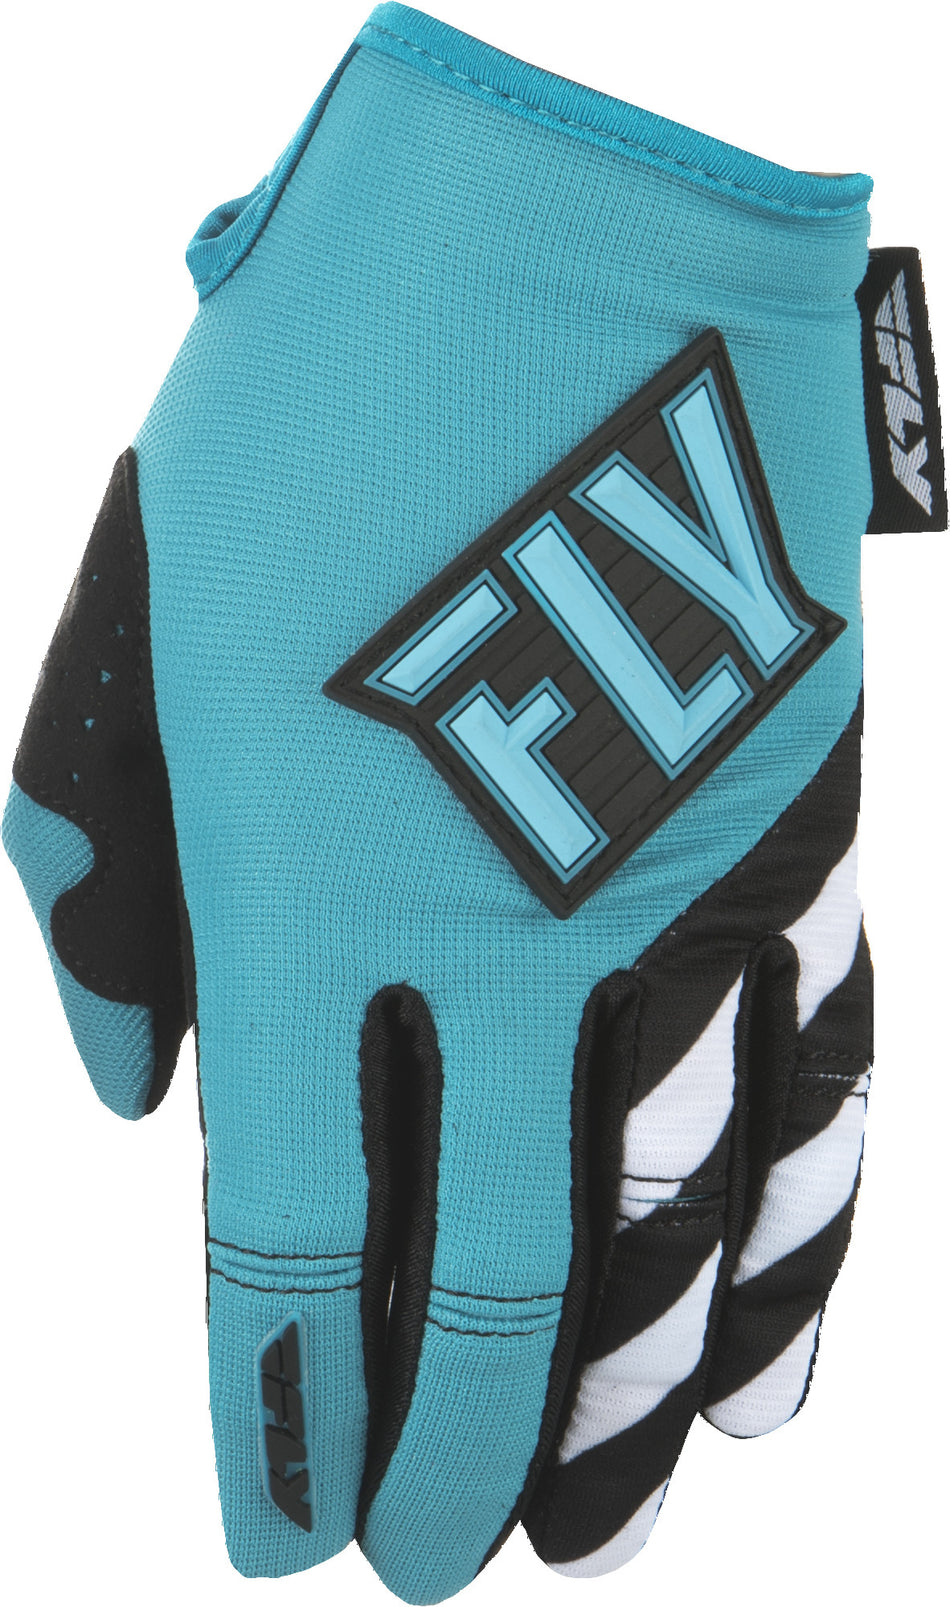 FLY RACING Kinetic Women's Gloves Blue/Teal L 371-61108